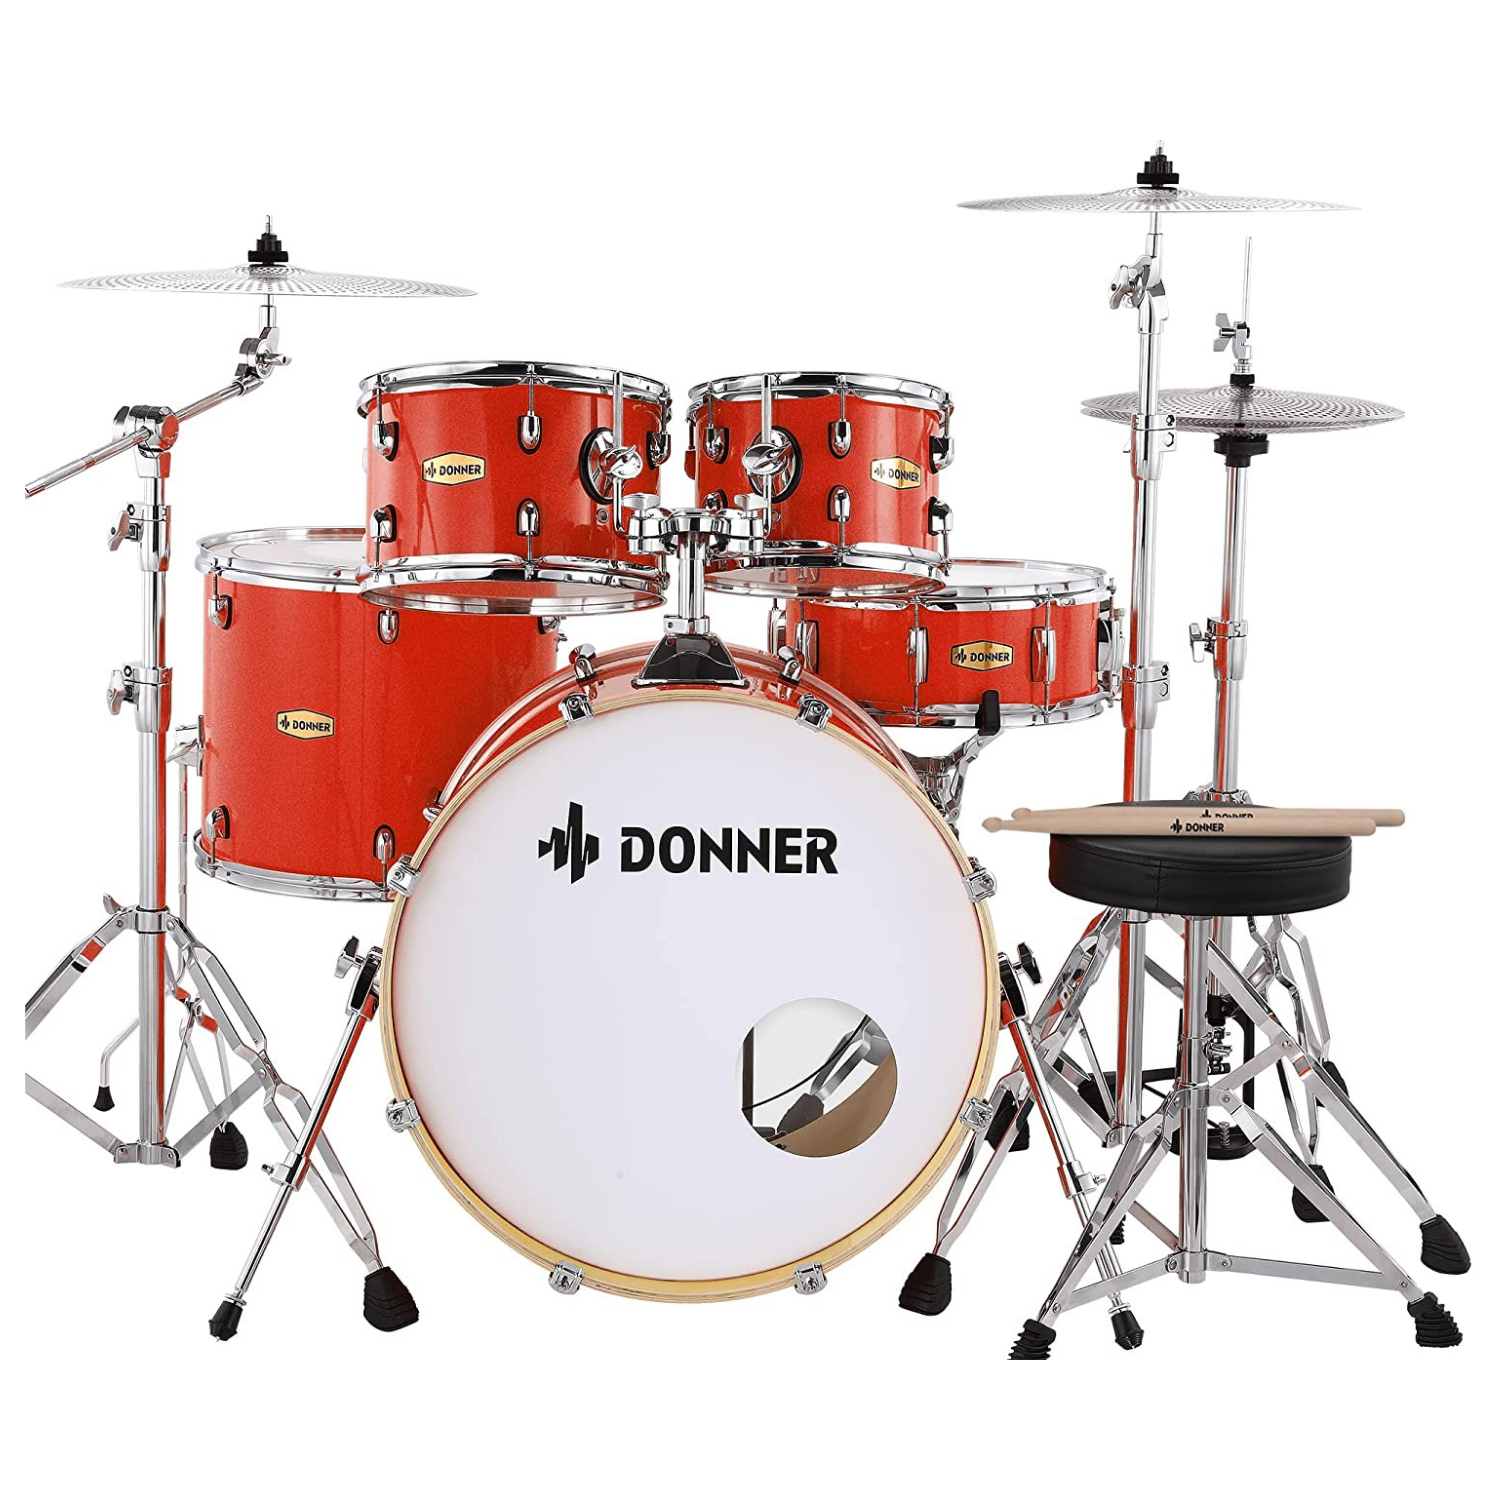 

Donner DDS-520 22-inch 5-Piece Professional Silent Drum Kit Full-Size Set